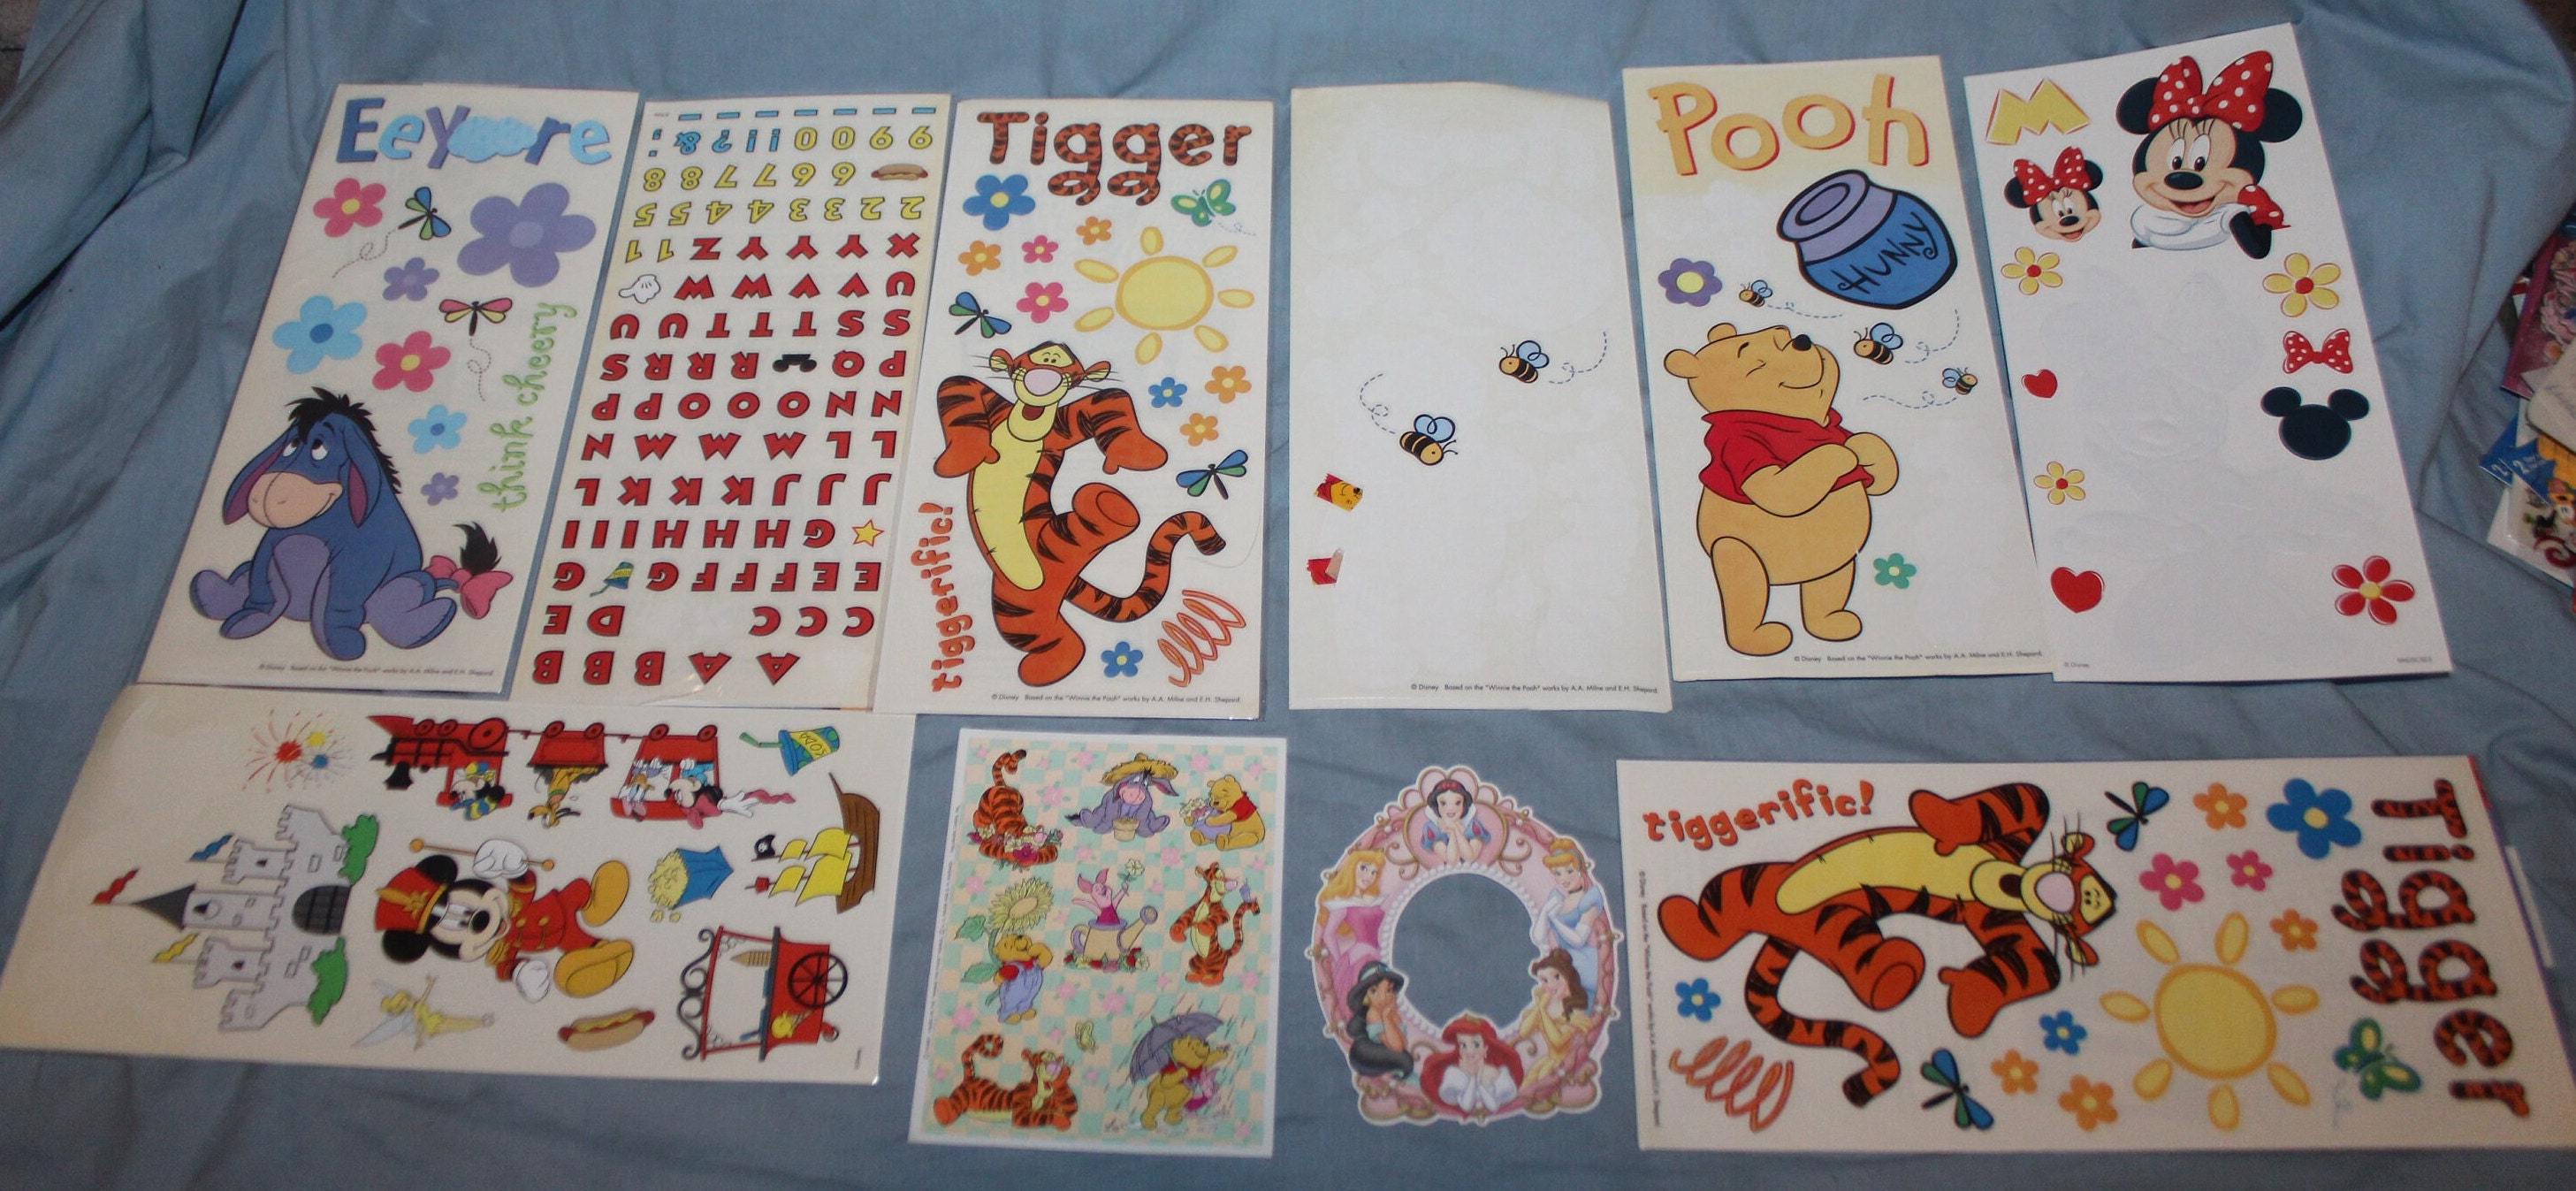 Large Lot Disney Scrapbooking Supplies - Stickers, Paper, & More